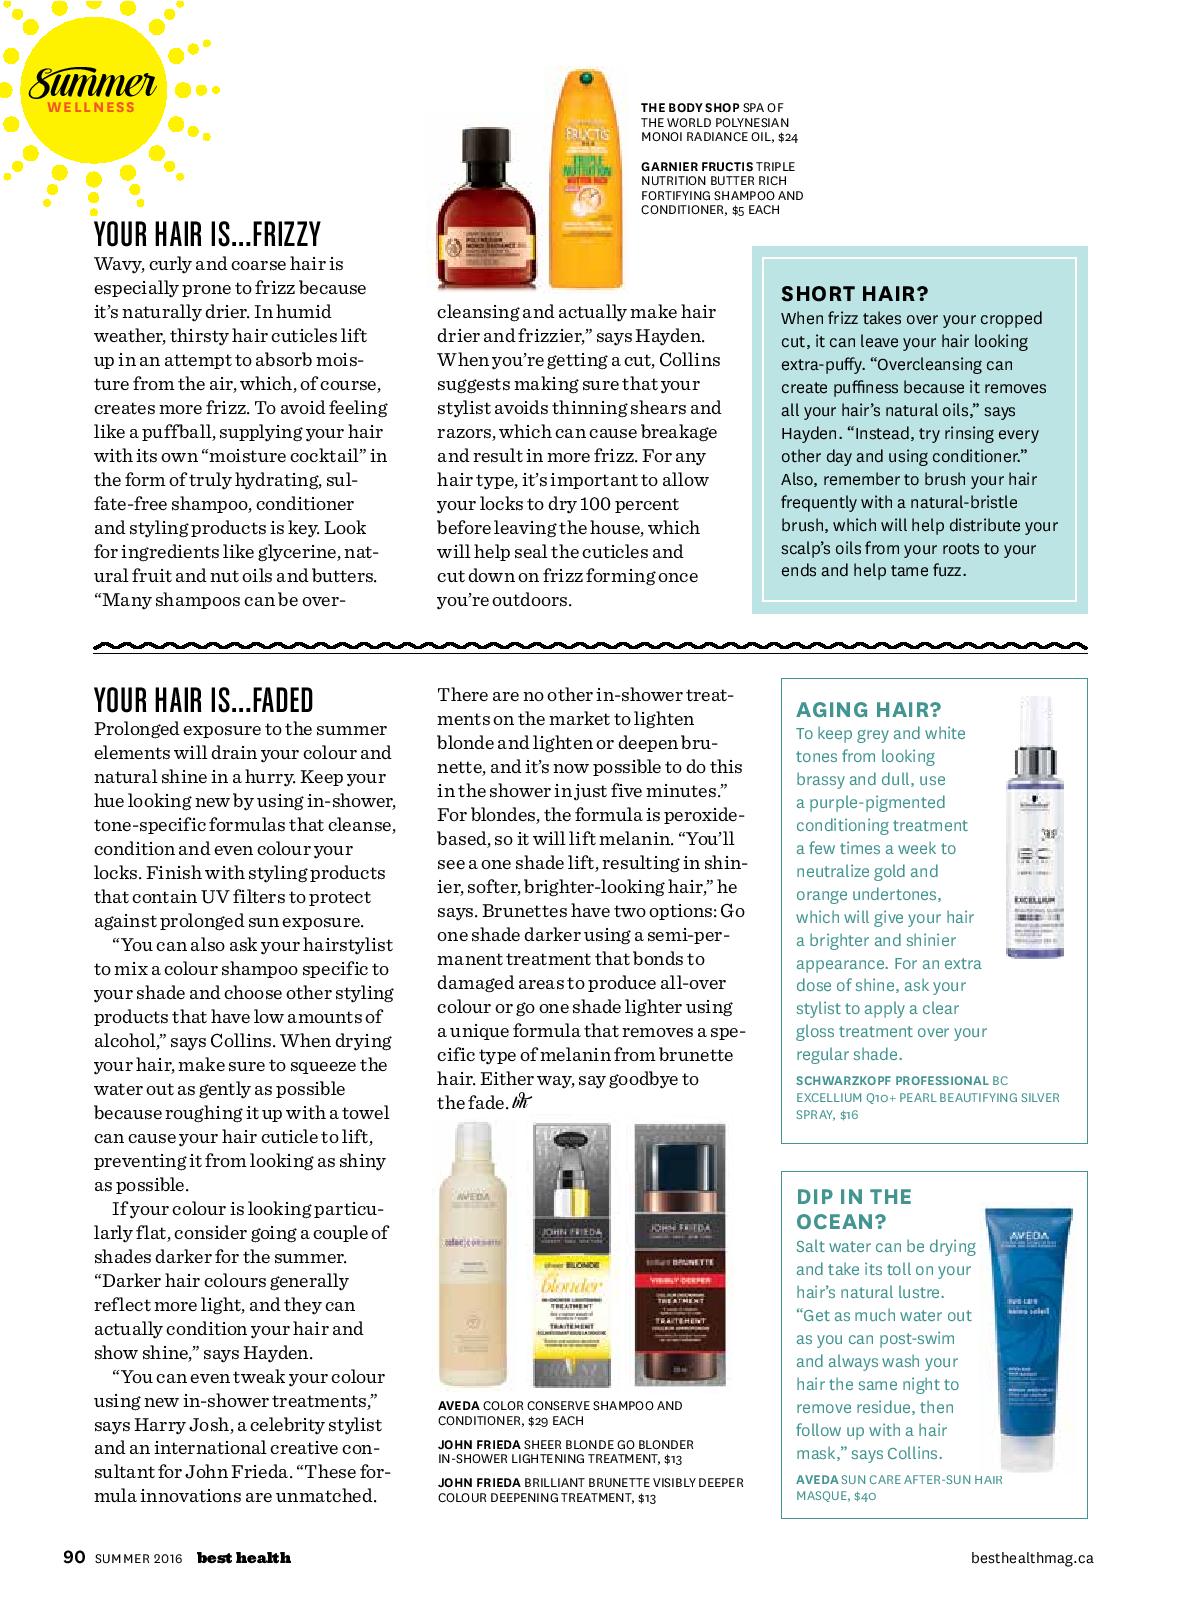 Best Health Summer Hair Feature-page-003 copy